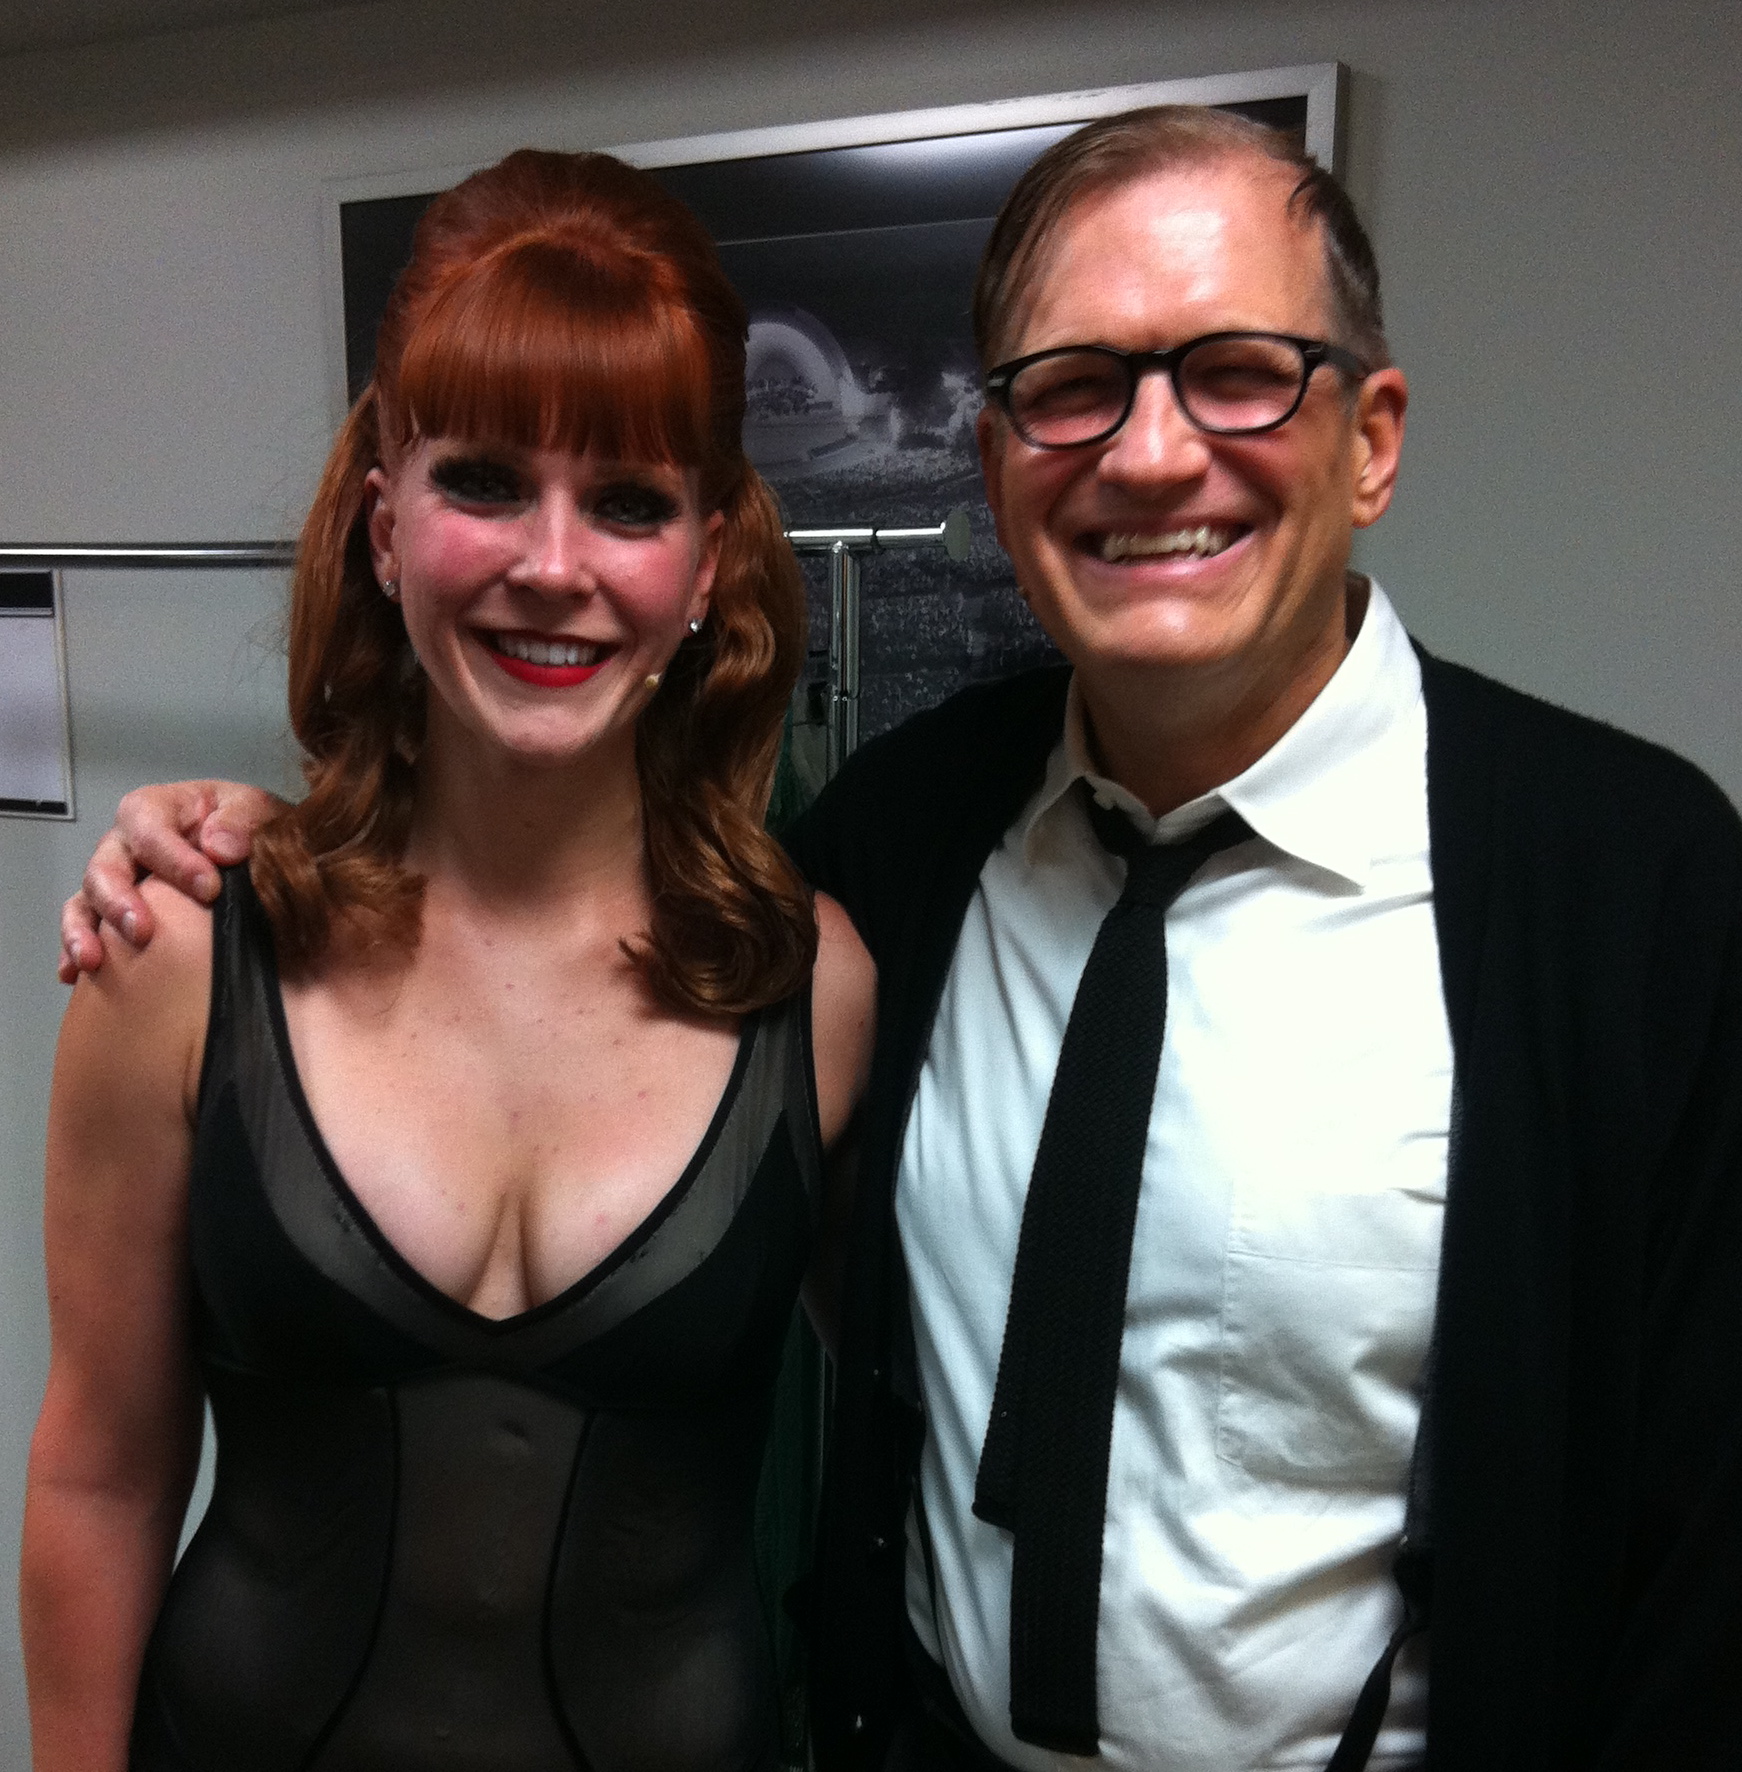 Backstage at the Hollywood Bowl, Drew Carey as 